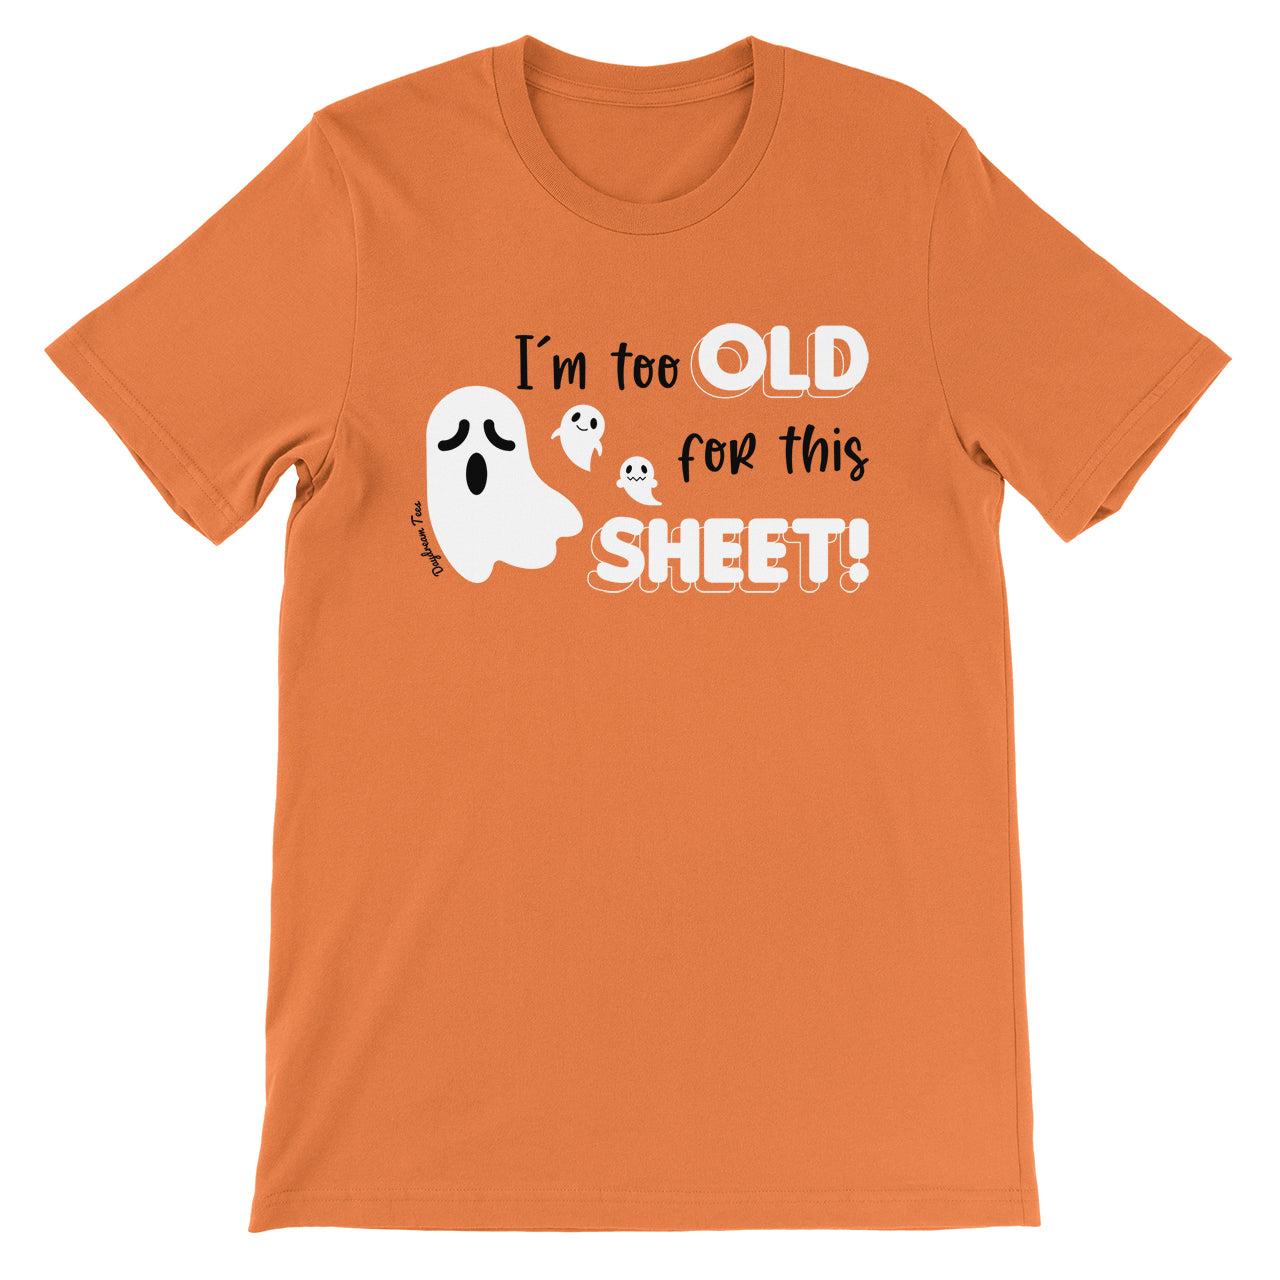 Daydream Tees I'm Too Old for this Sheet Orange